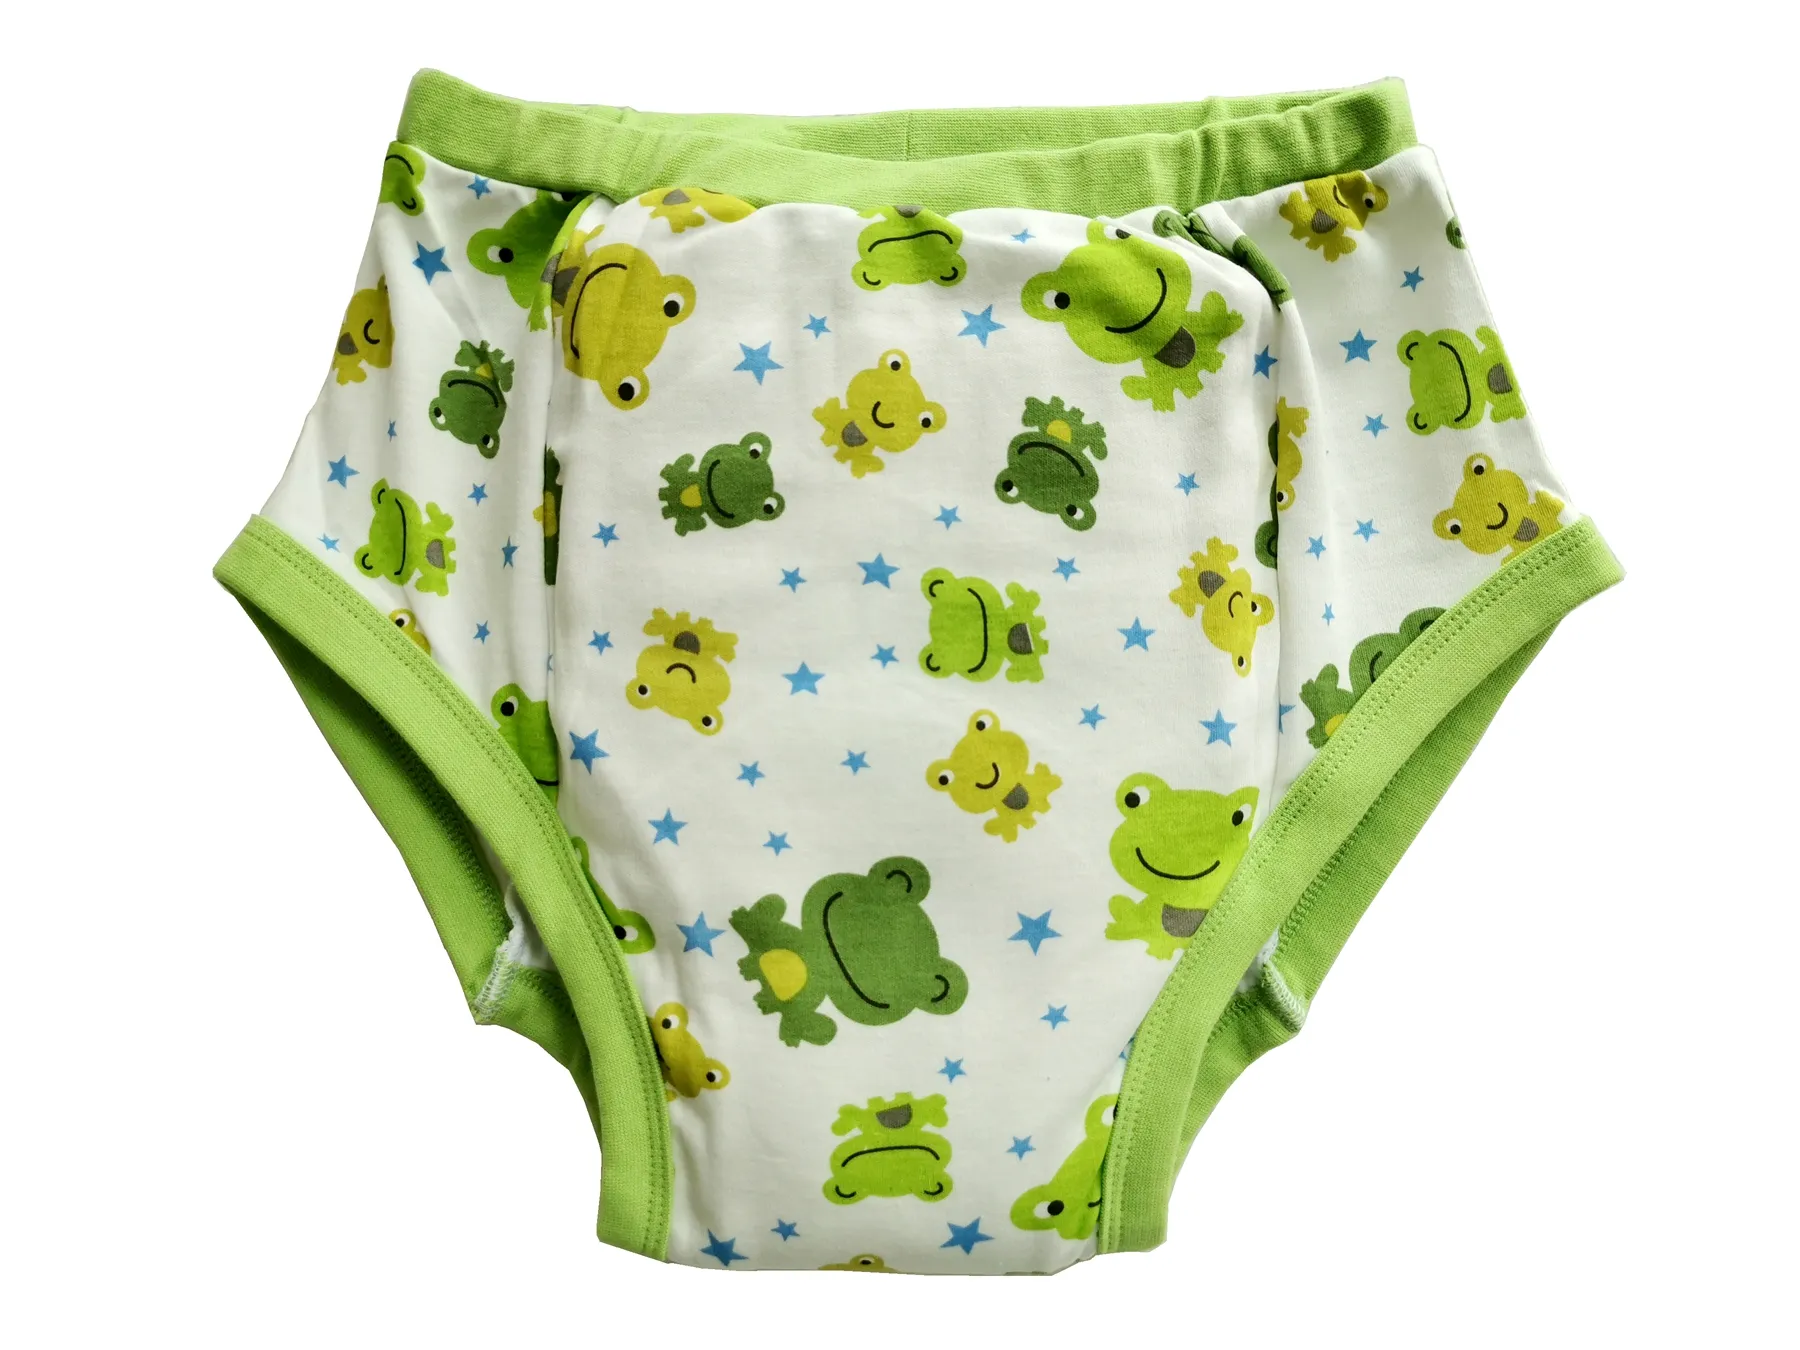 Printed Frog Training Pants For Adults ABDL Abdl Diaper Pants For